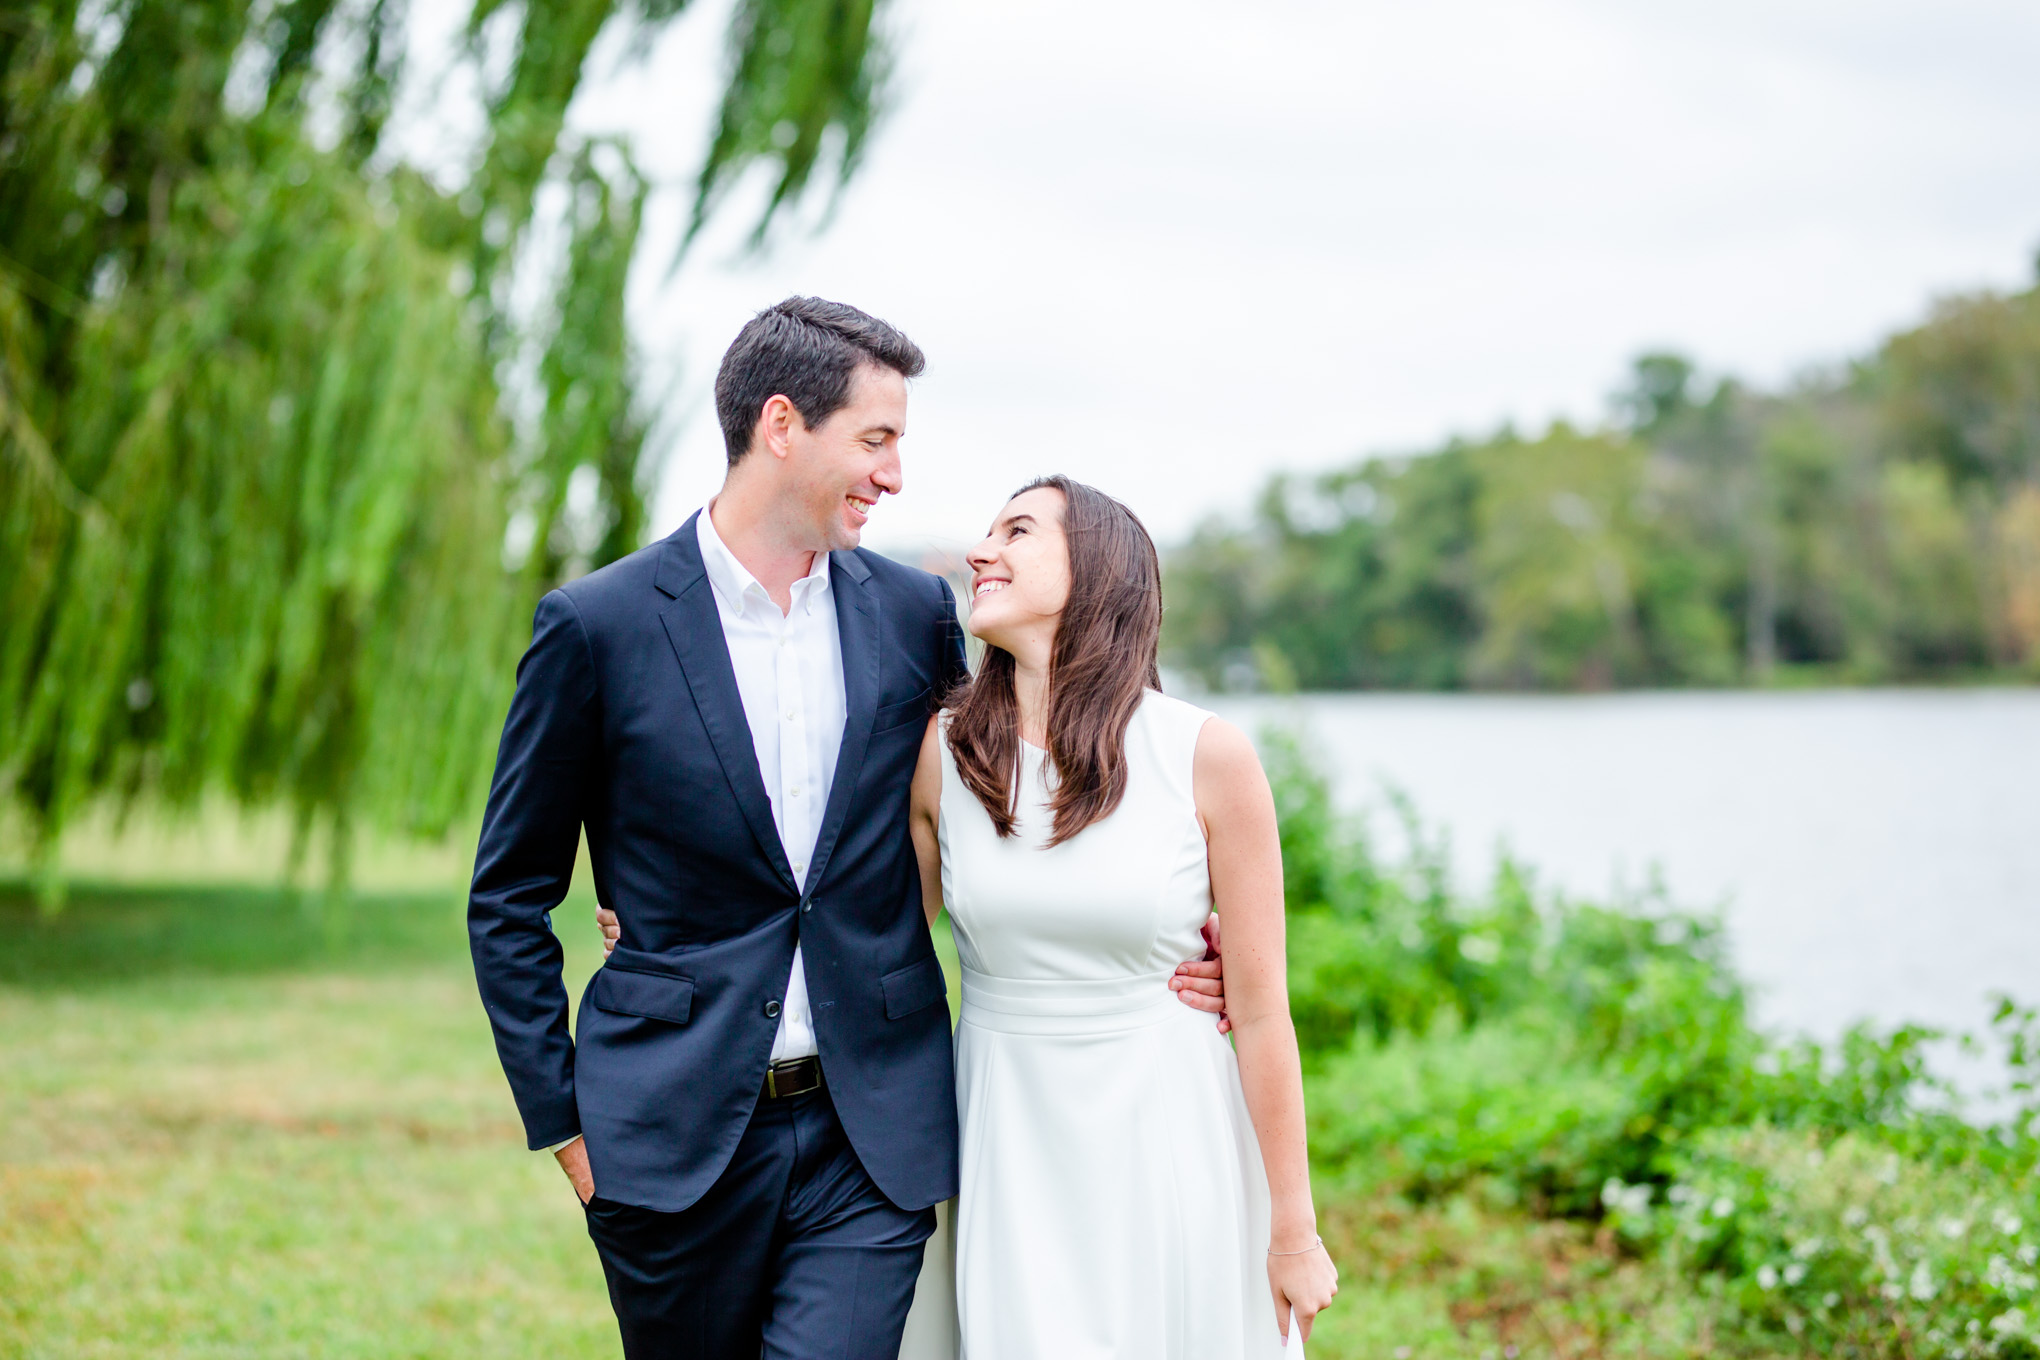 Roosevelt Island engagement photos, Arlington Virginia photographer, D.C. engagement photographer, D.C. wedding photographer, D.C. wedding photography, Roosevelt Island, G.W. parkway engagement photos, natural light engagement photos, engagement photos ideas, summer engagement photos, engagement session outfits, classic engagement photos, blue and white outfits